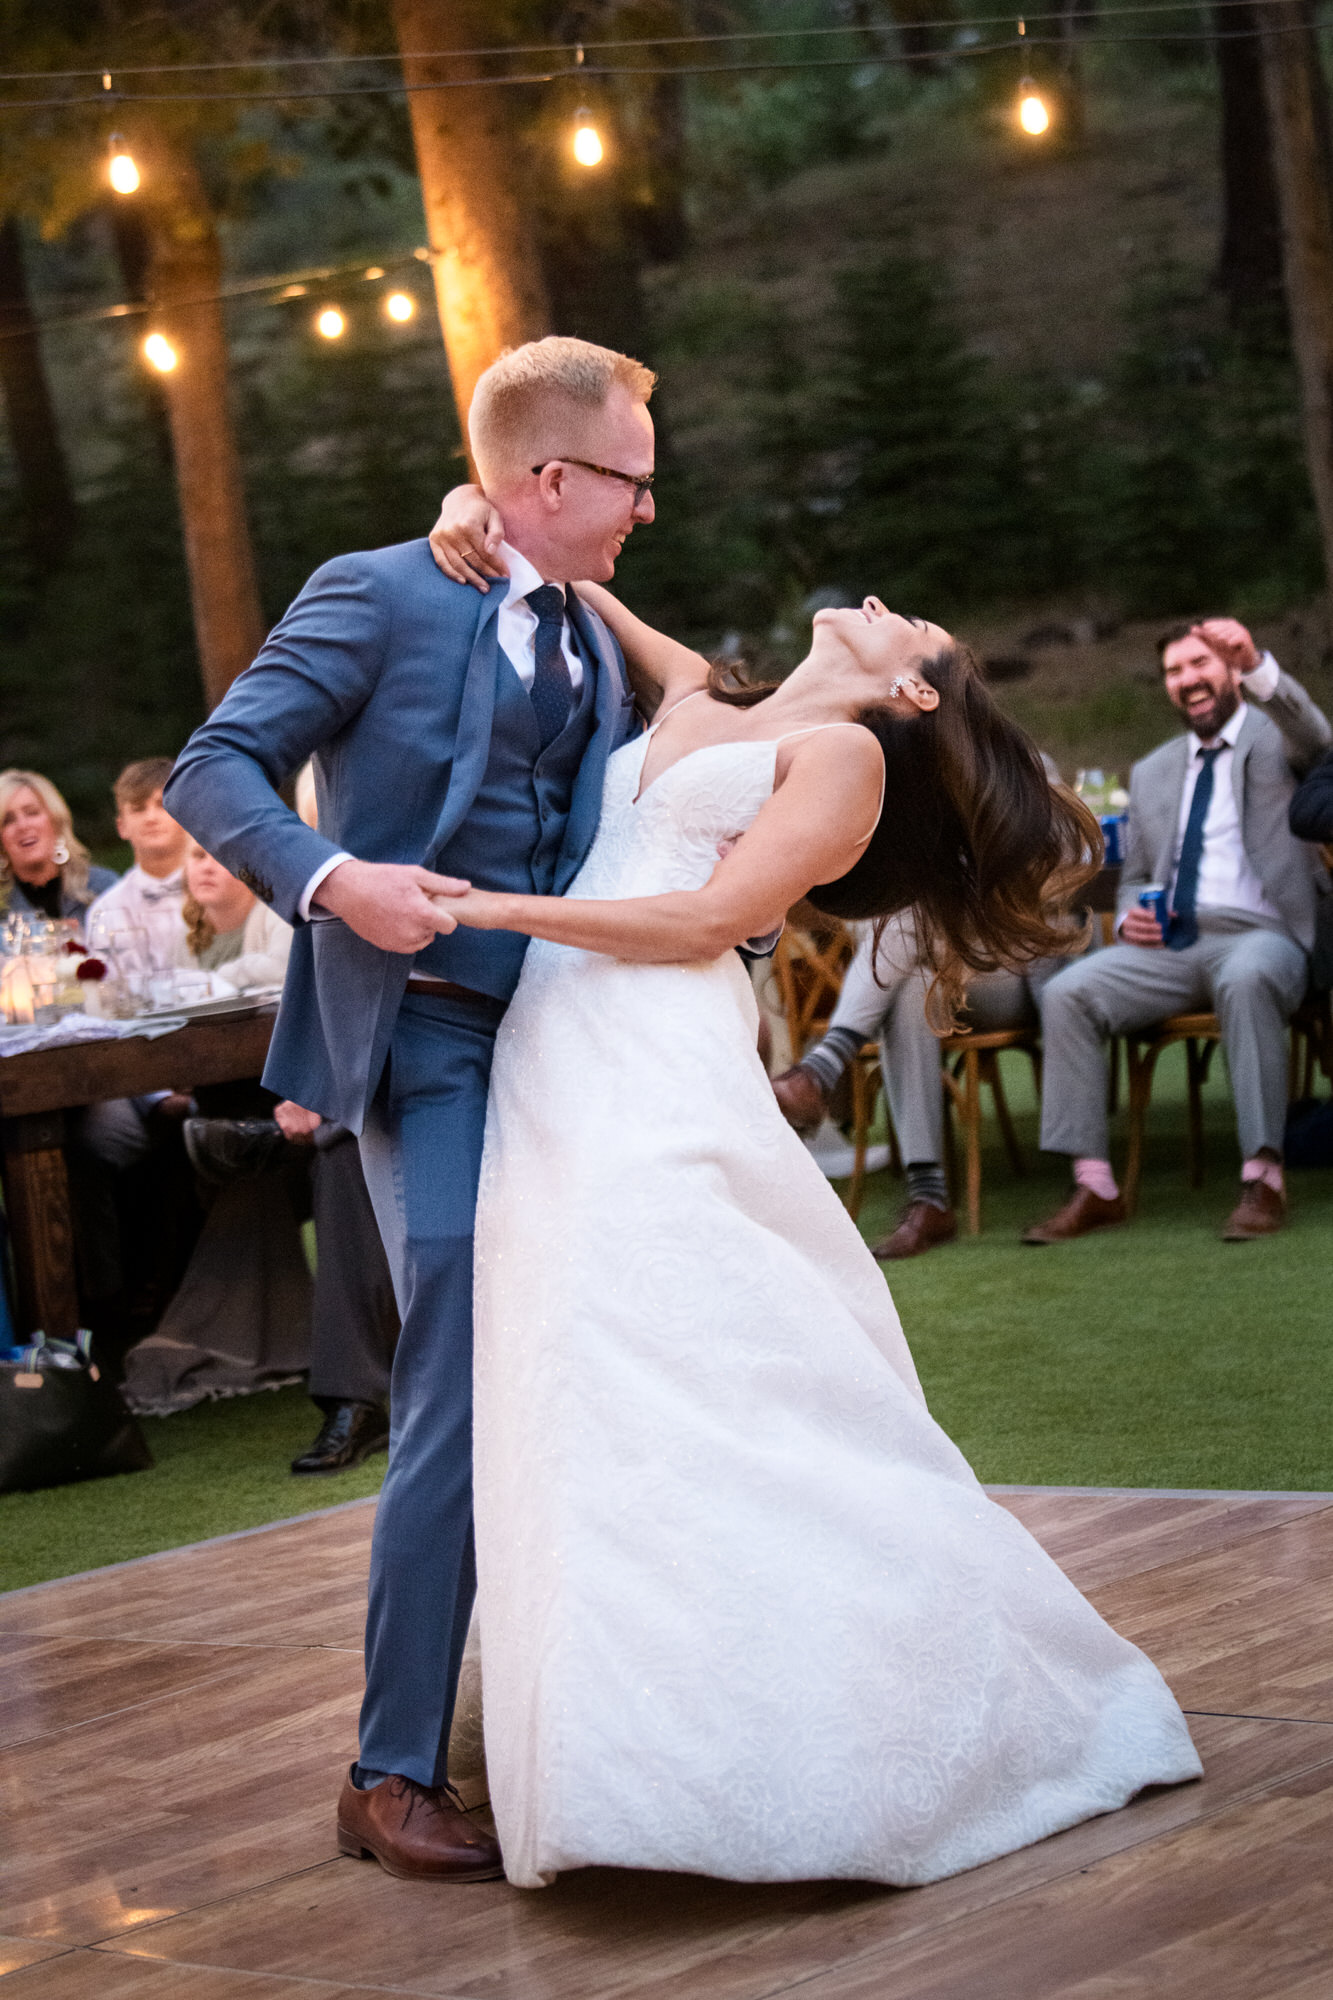 The bride and groom's first dance at their Dancing Pines reception.